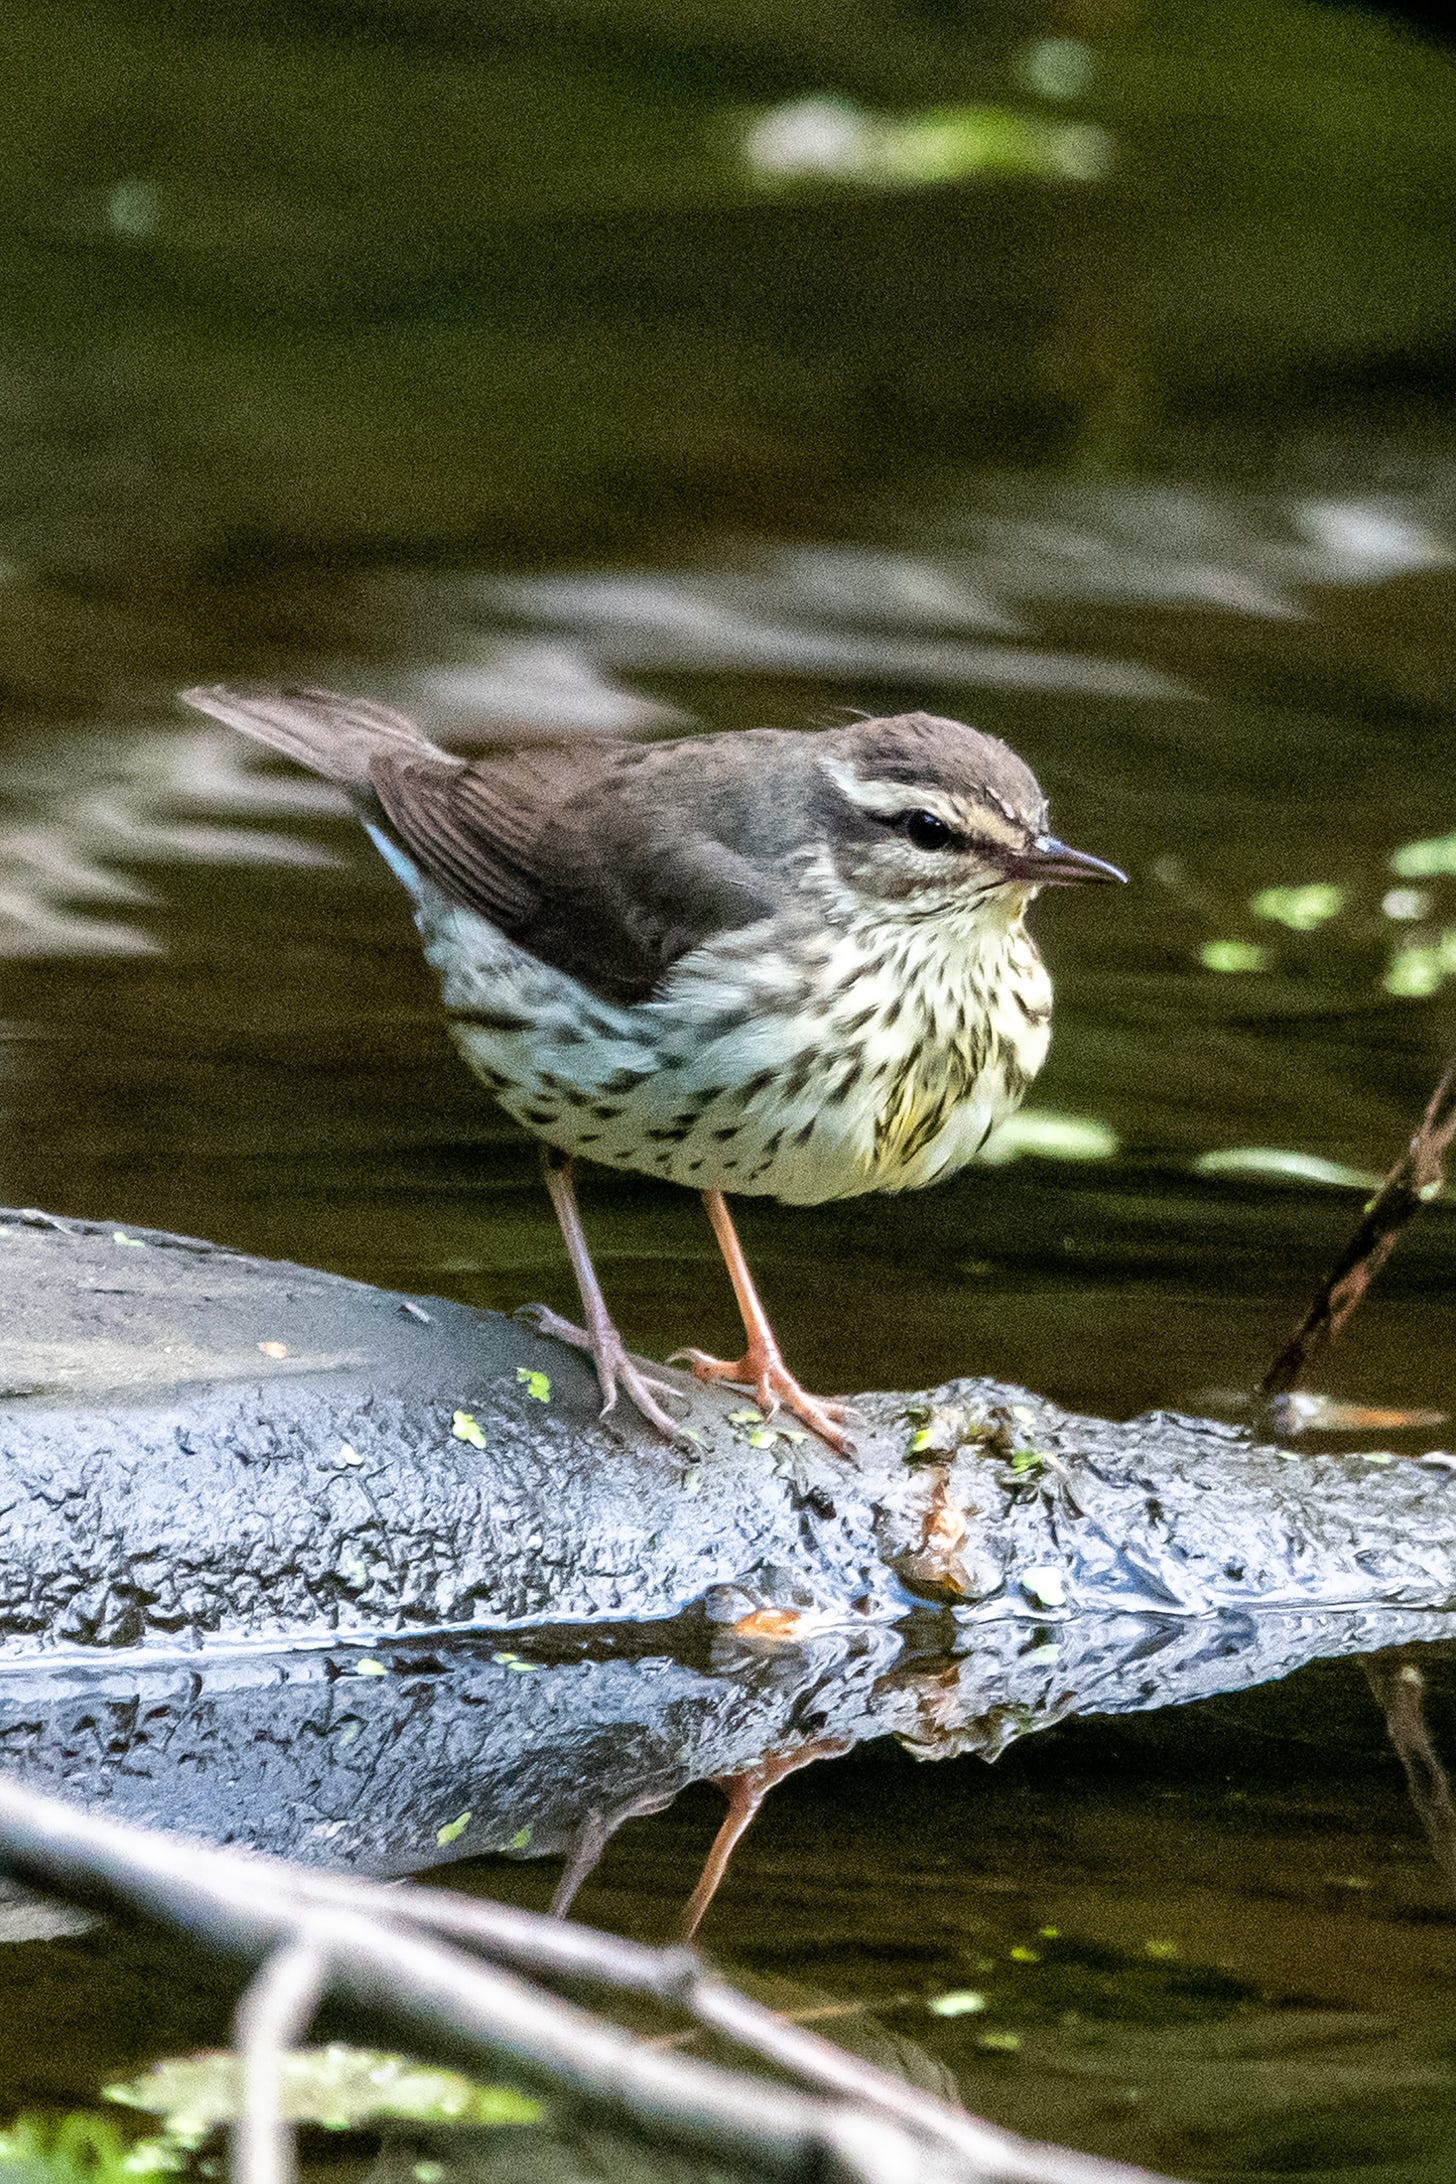 A Northern waterthrush, with brown cap and back, speckled neck and breast, and narrowing supercilium, stands on a branch in water